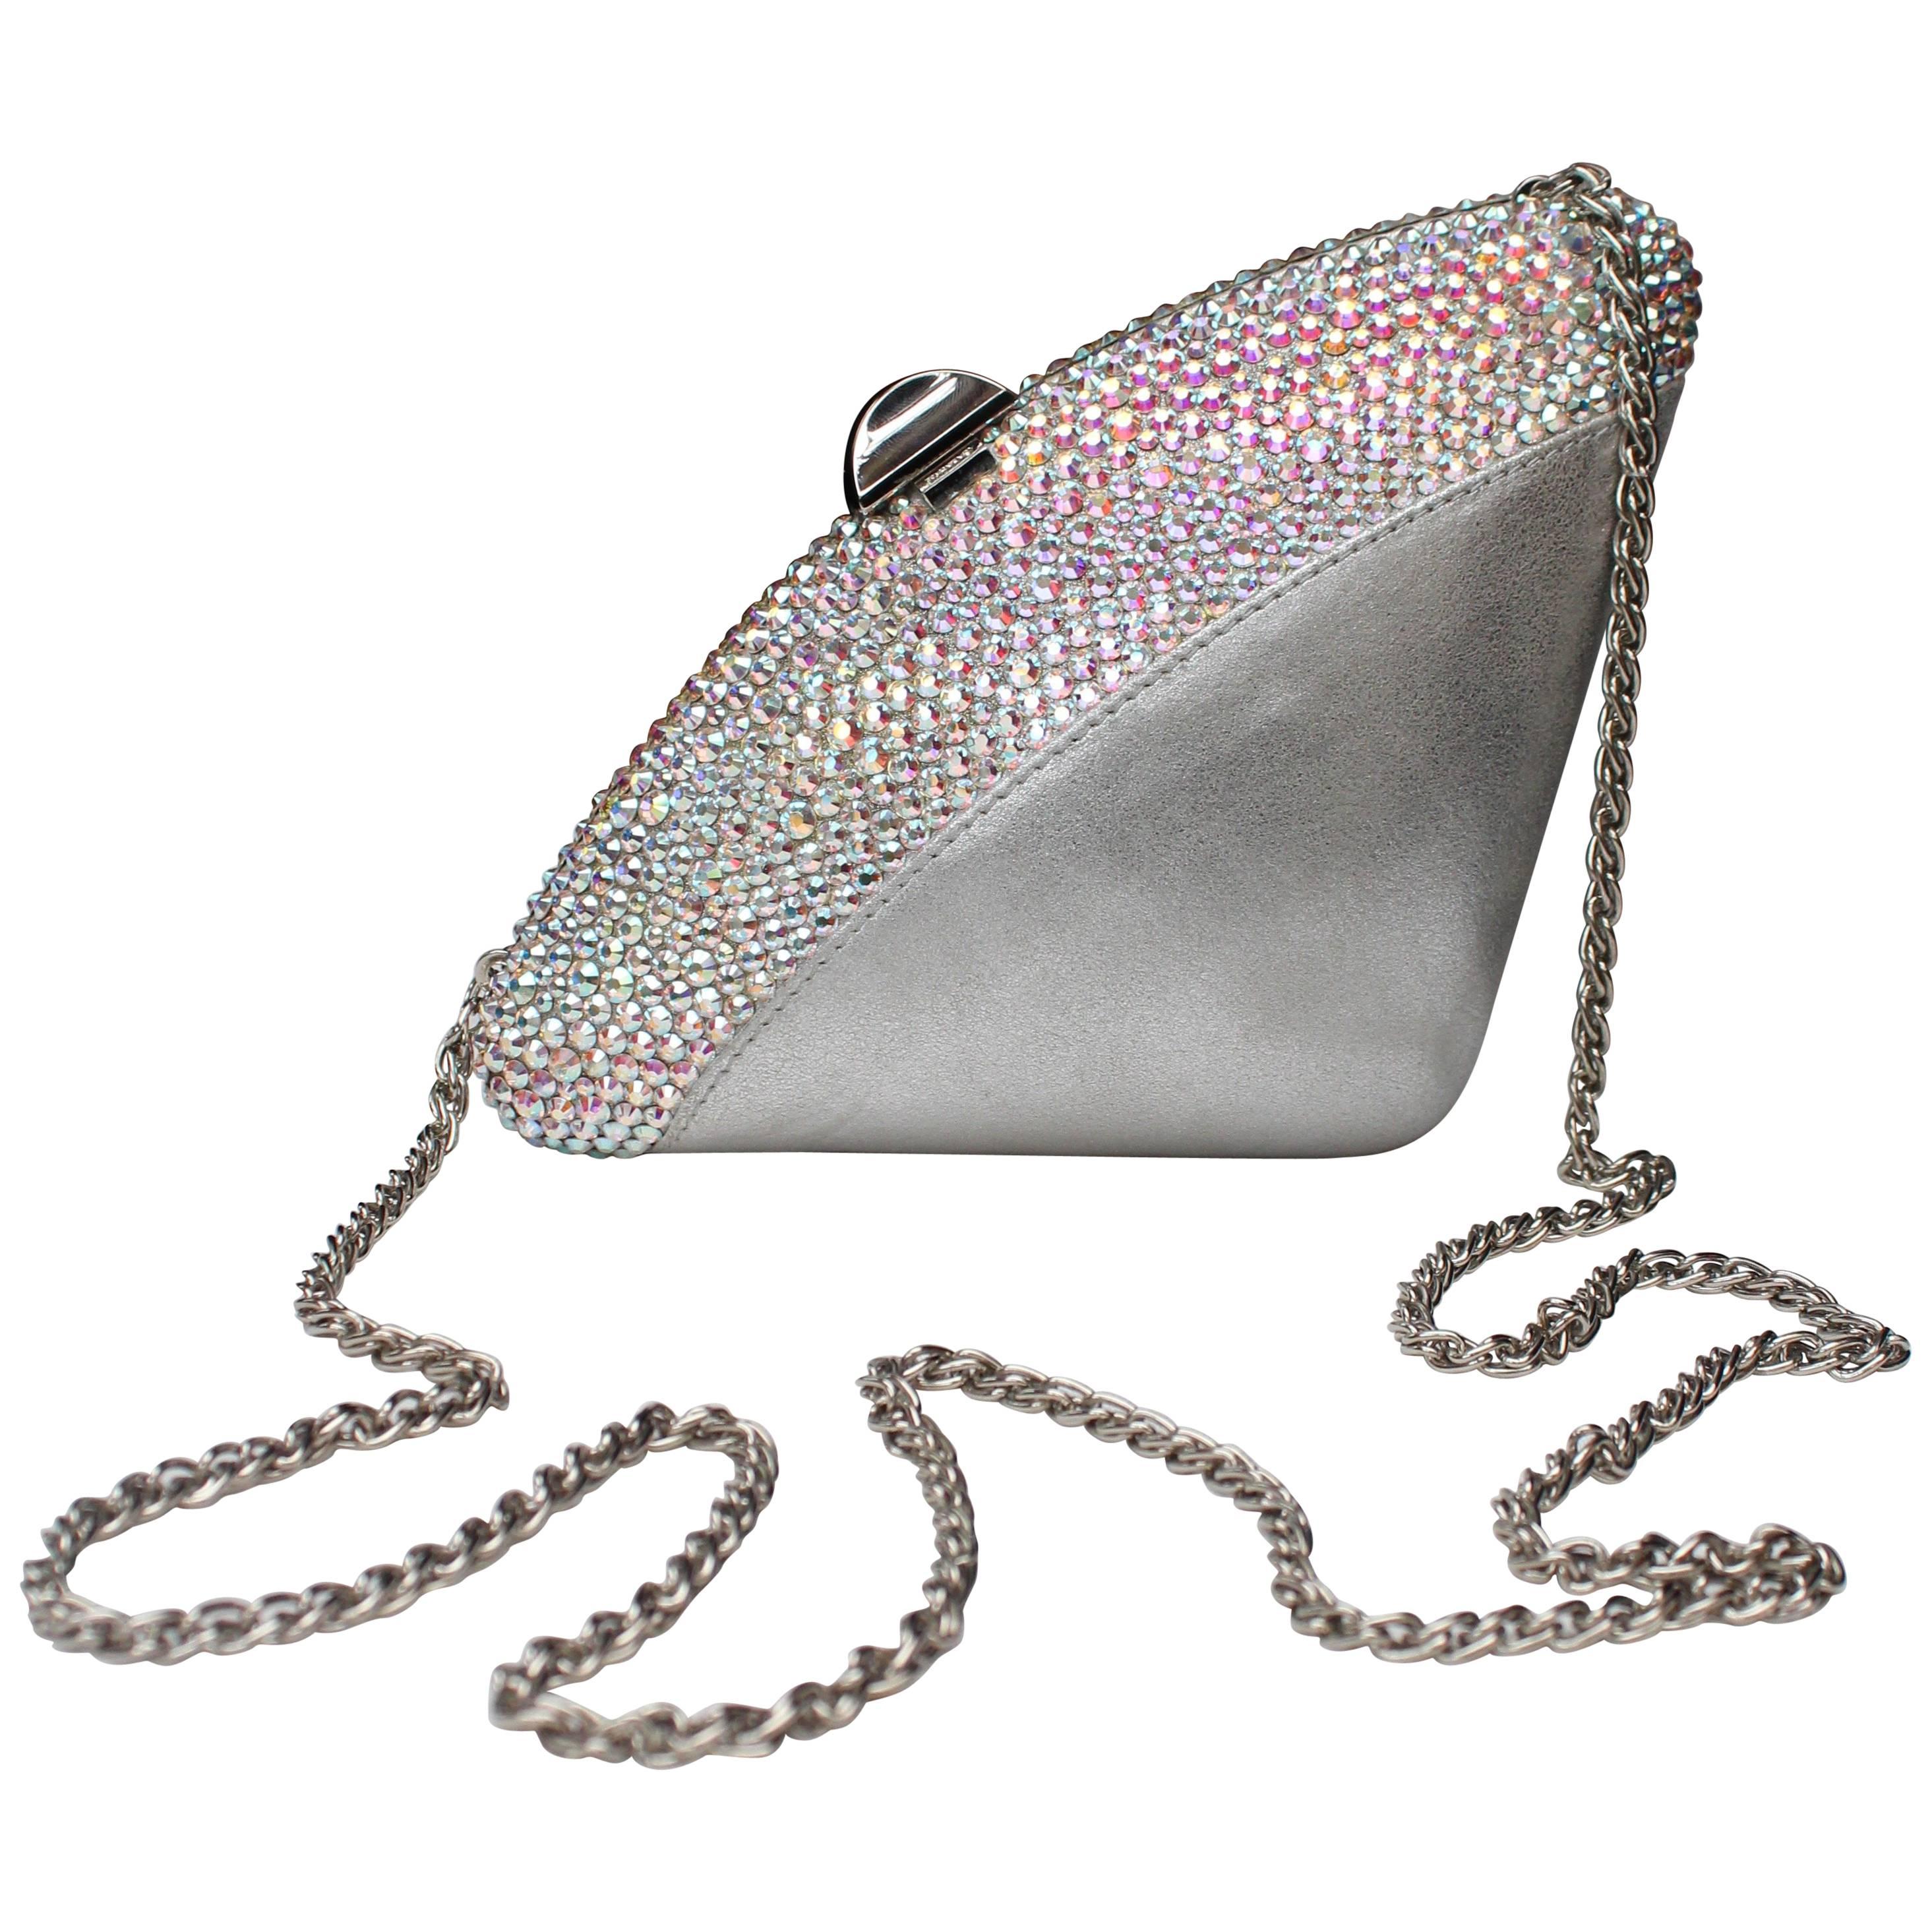 Rodo silvery leather small evening bag